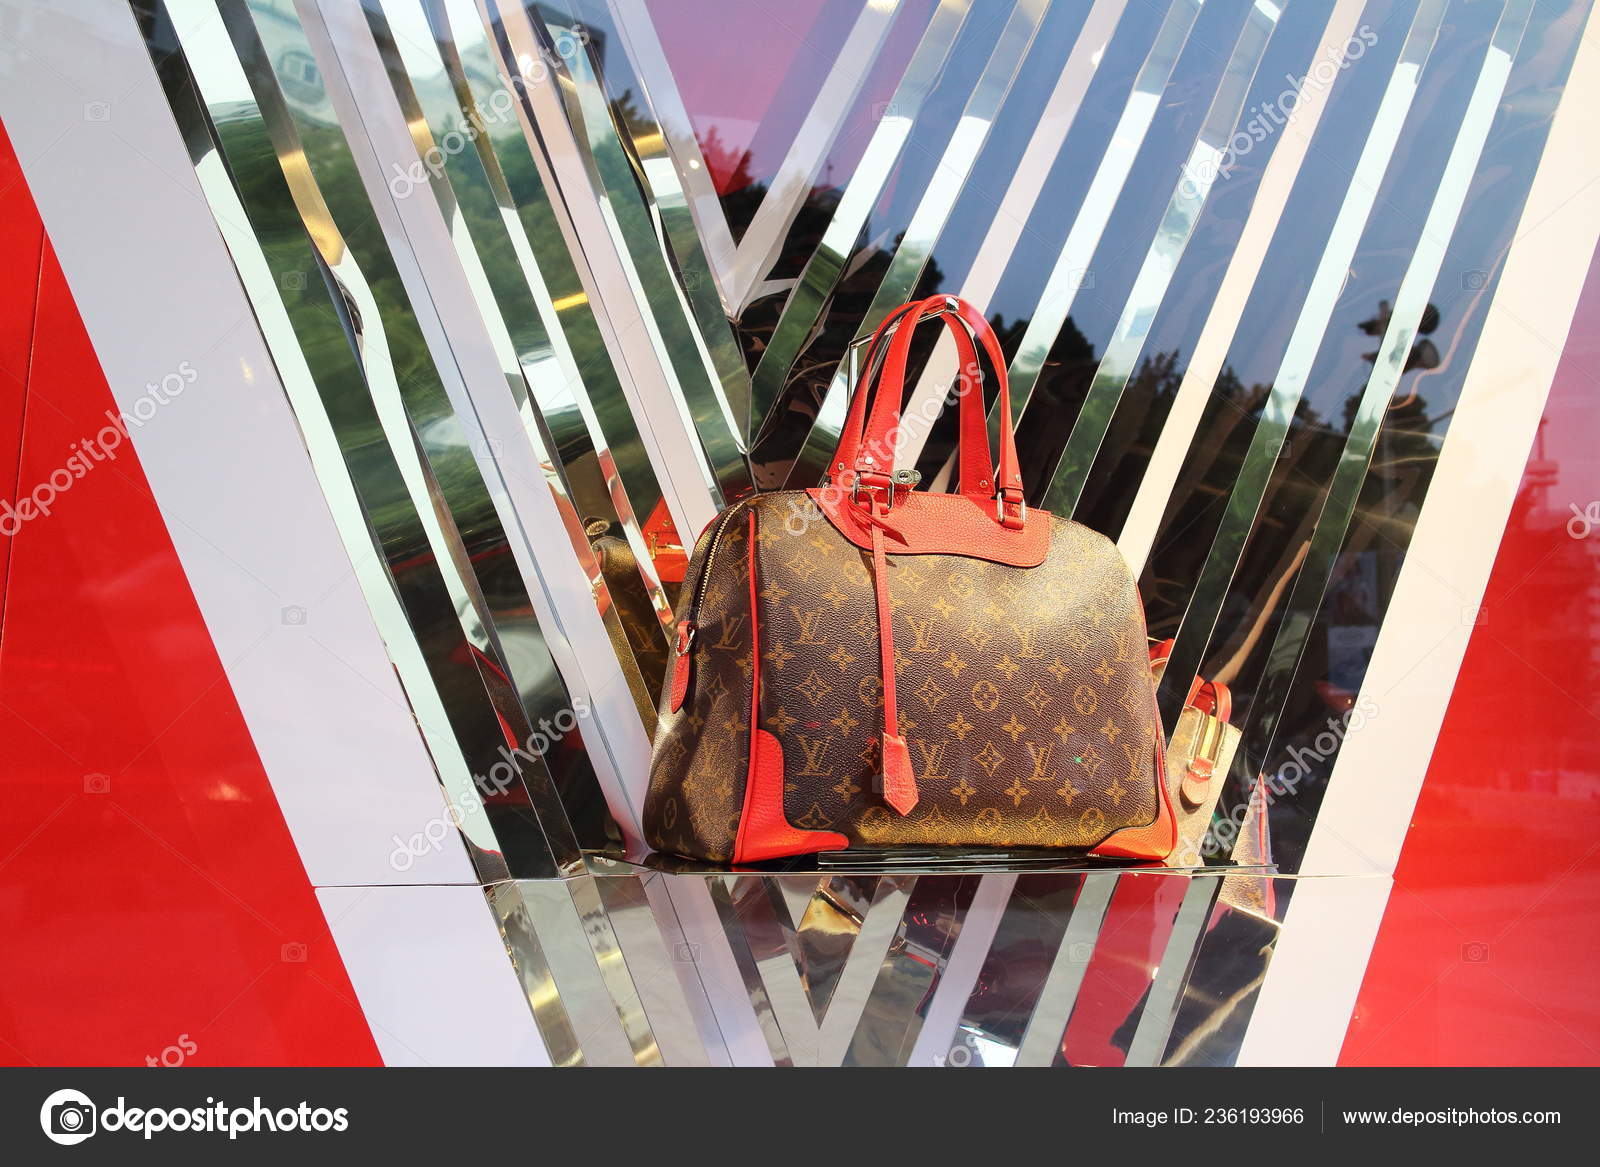 lv handbags for women from china